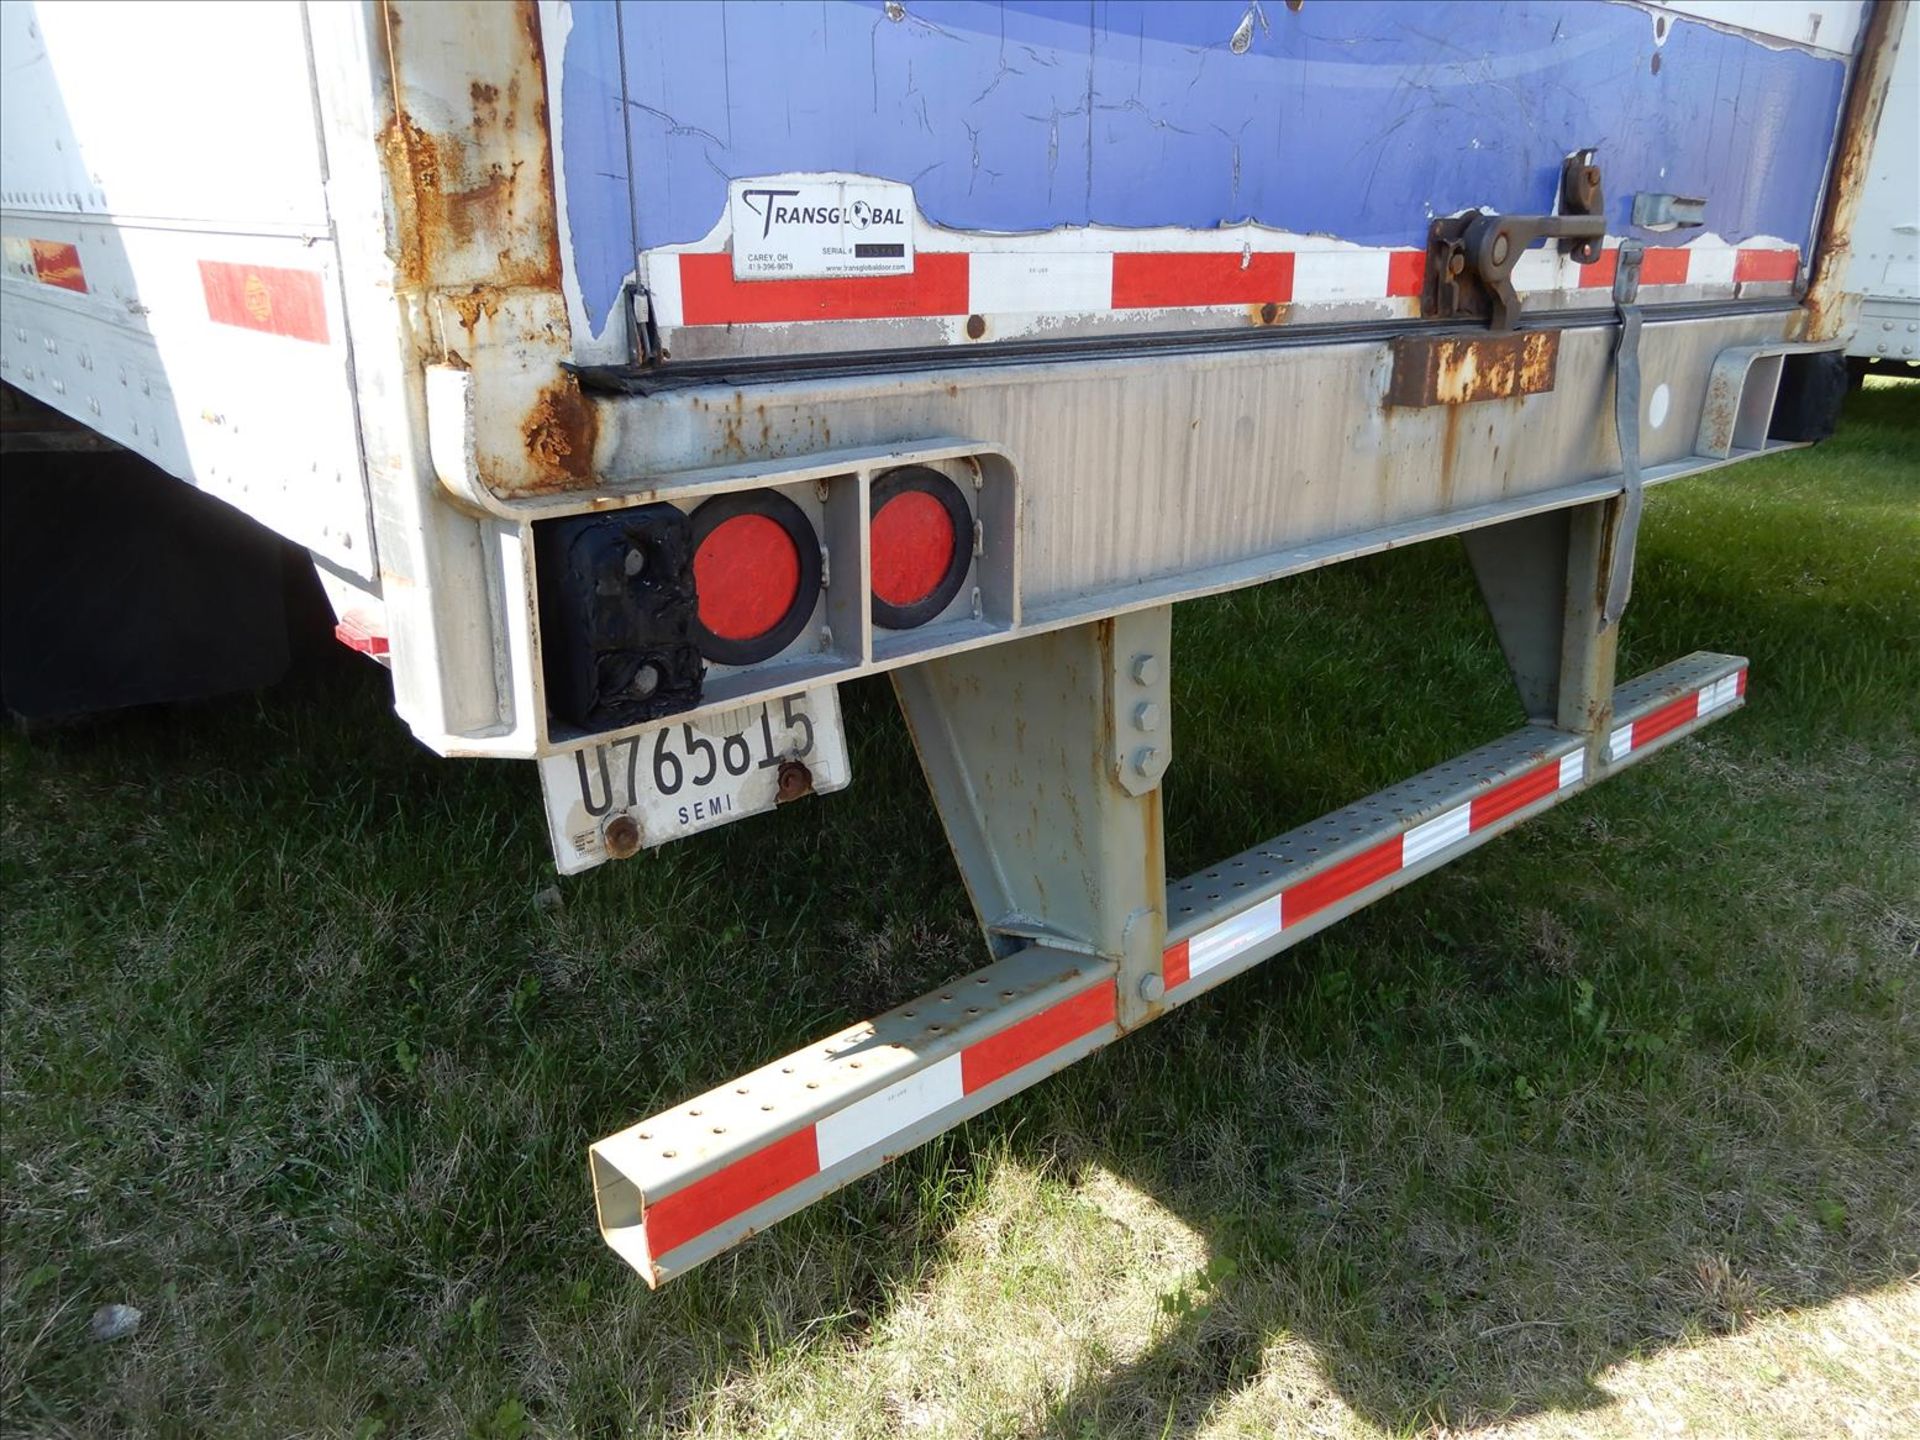 2008 Utility Trailer - Located in Indianapolis, IN - Image 24 of 35